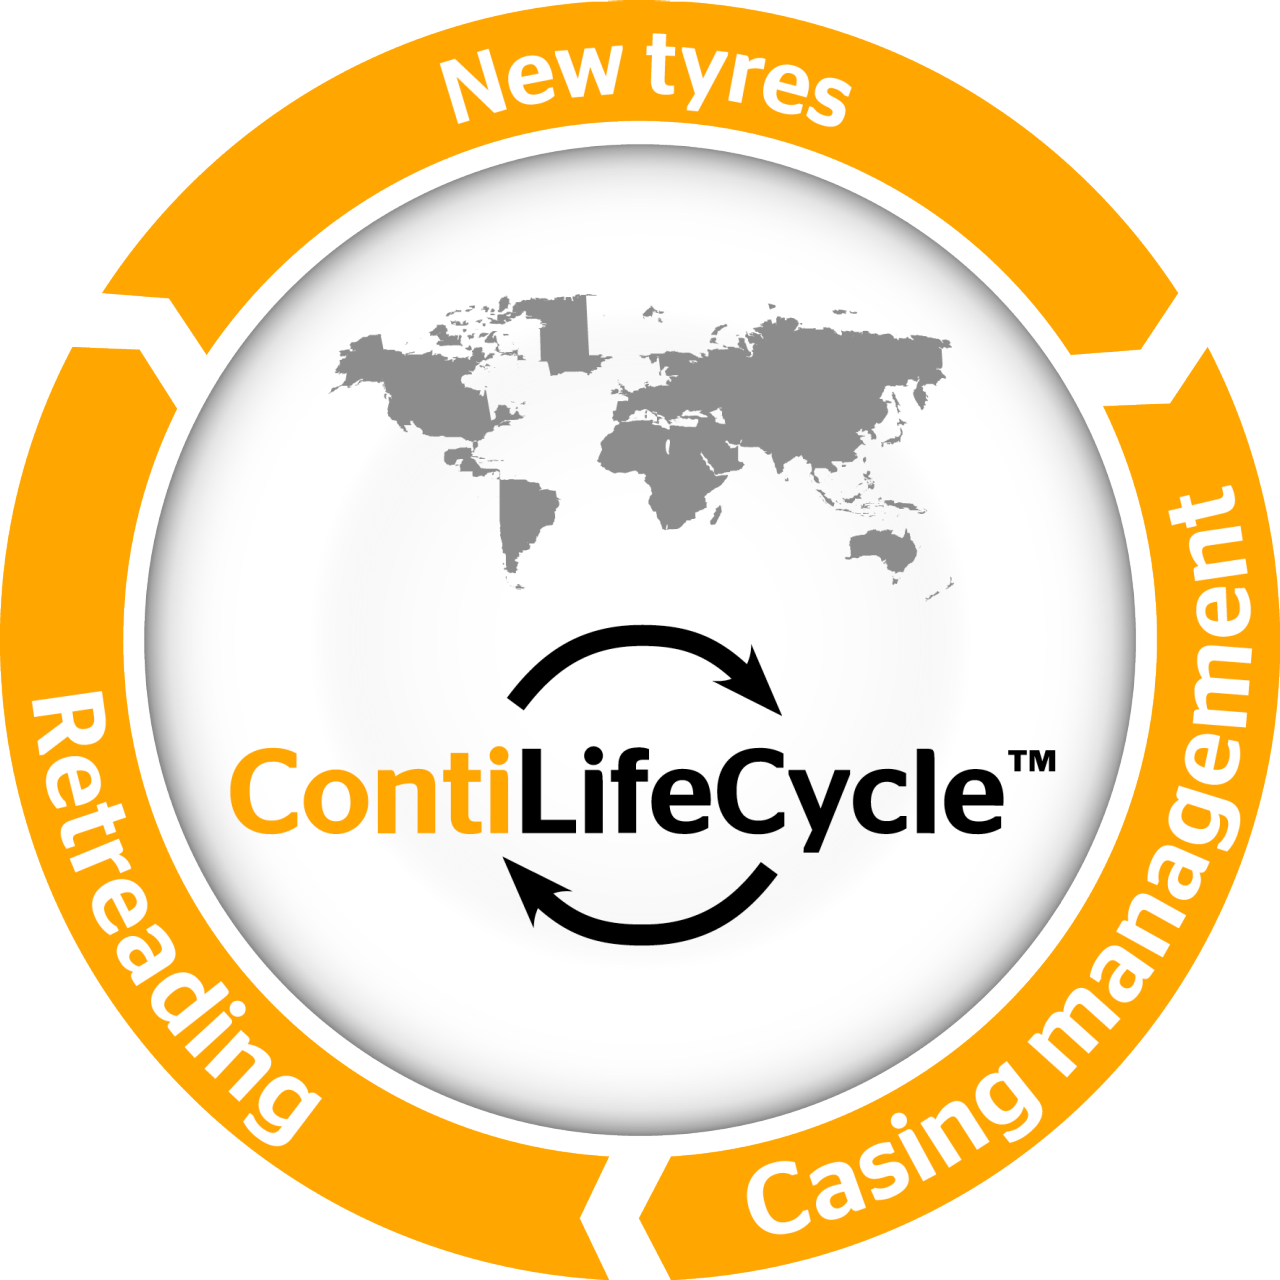 the figure shows the ContiLifeCycle Cycle includes: New tires, casing management and retreading